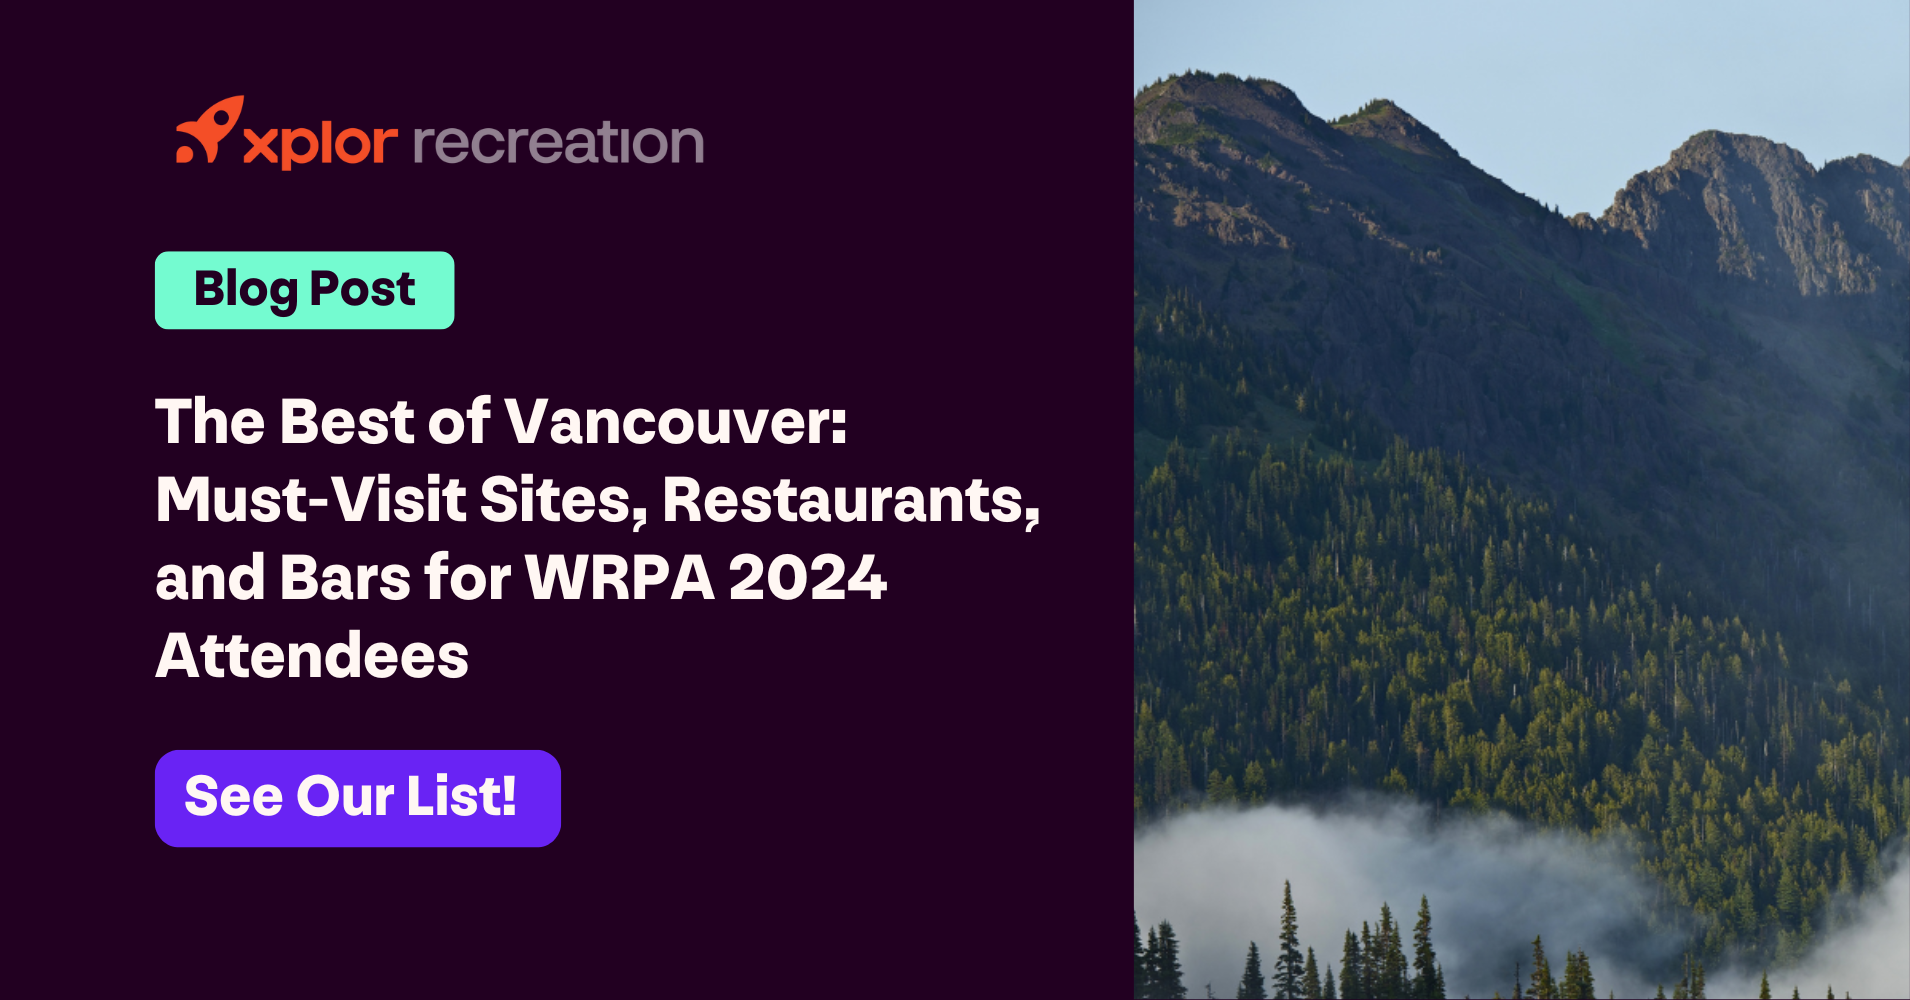 Graphic of The Best of Vancouver: Must-Visit Sites, Restaurants, and Bars for WRPA 2024 Attendees